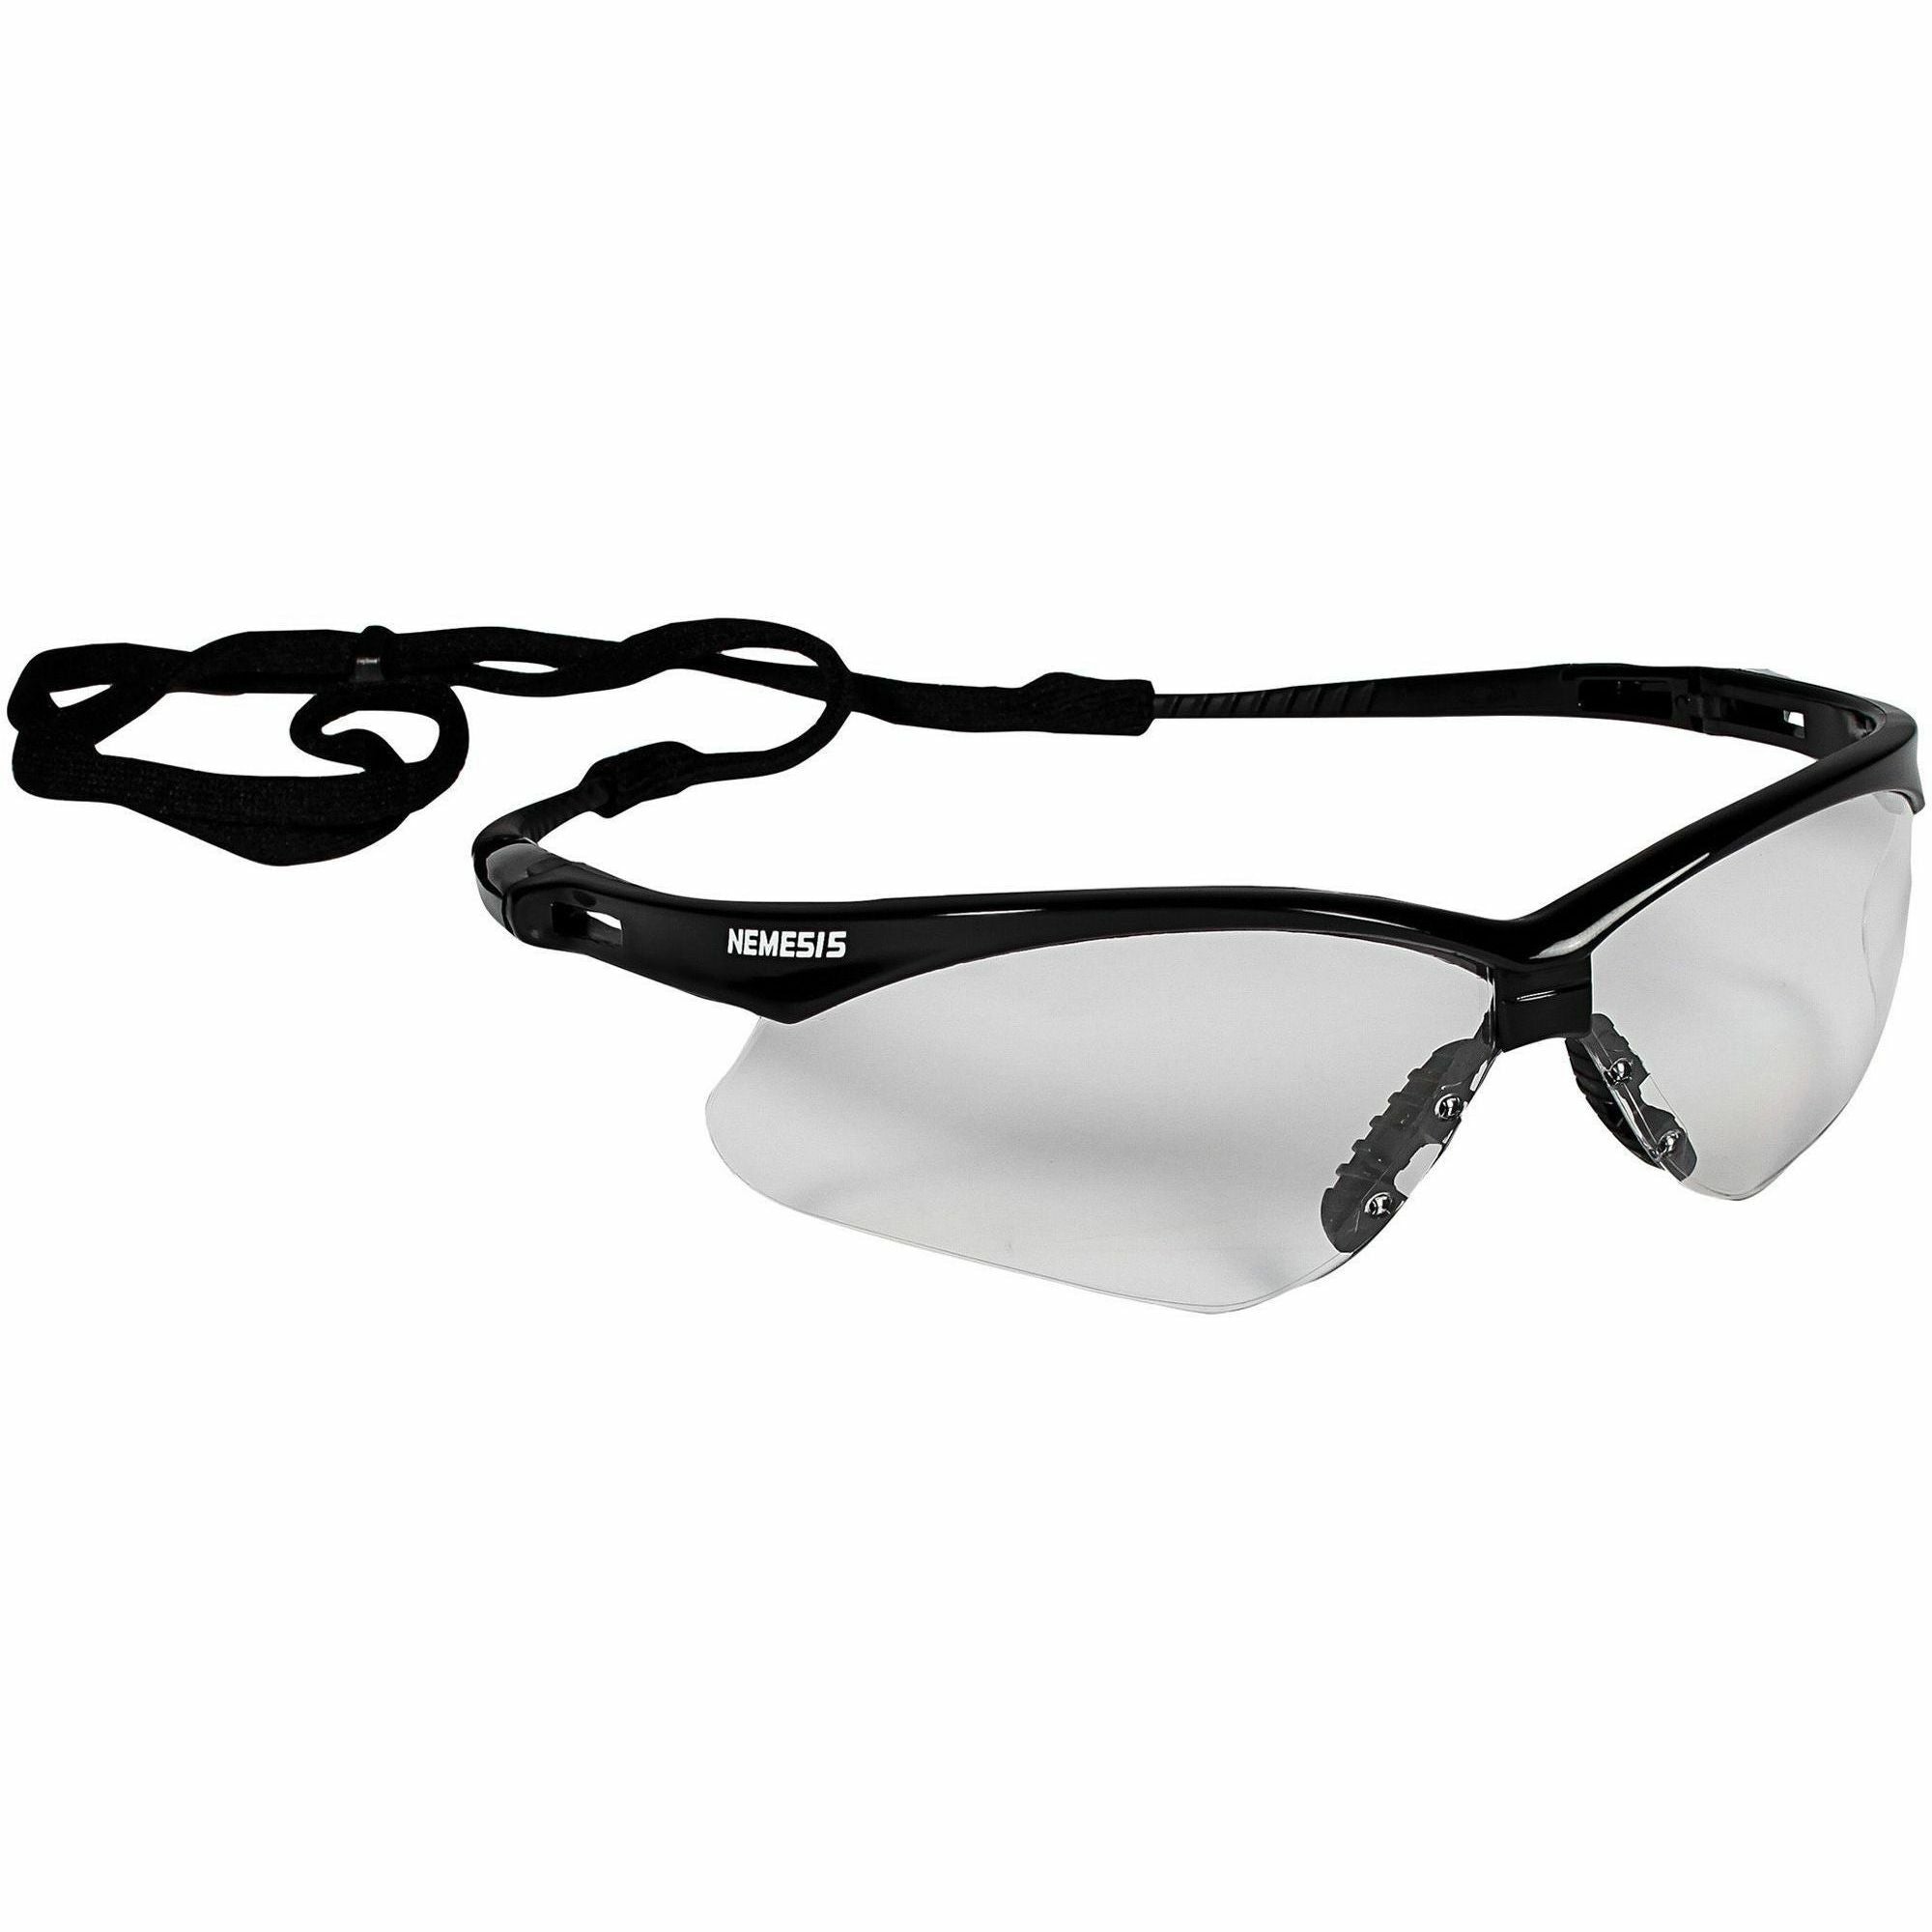 kimberly-clark-v30-nemesis-safety-eyewear-recommended-for-indoor-eye-polycarbonate-clear-durable-lightweight-uv-resistant-12-box_kcc25676bx - 1